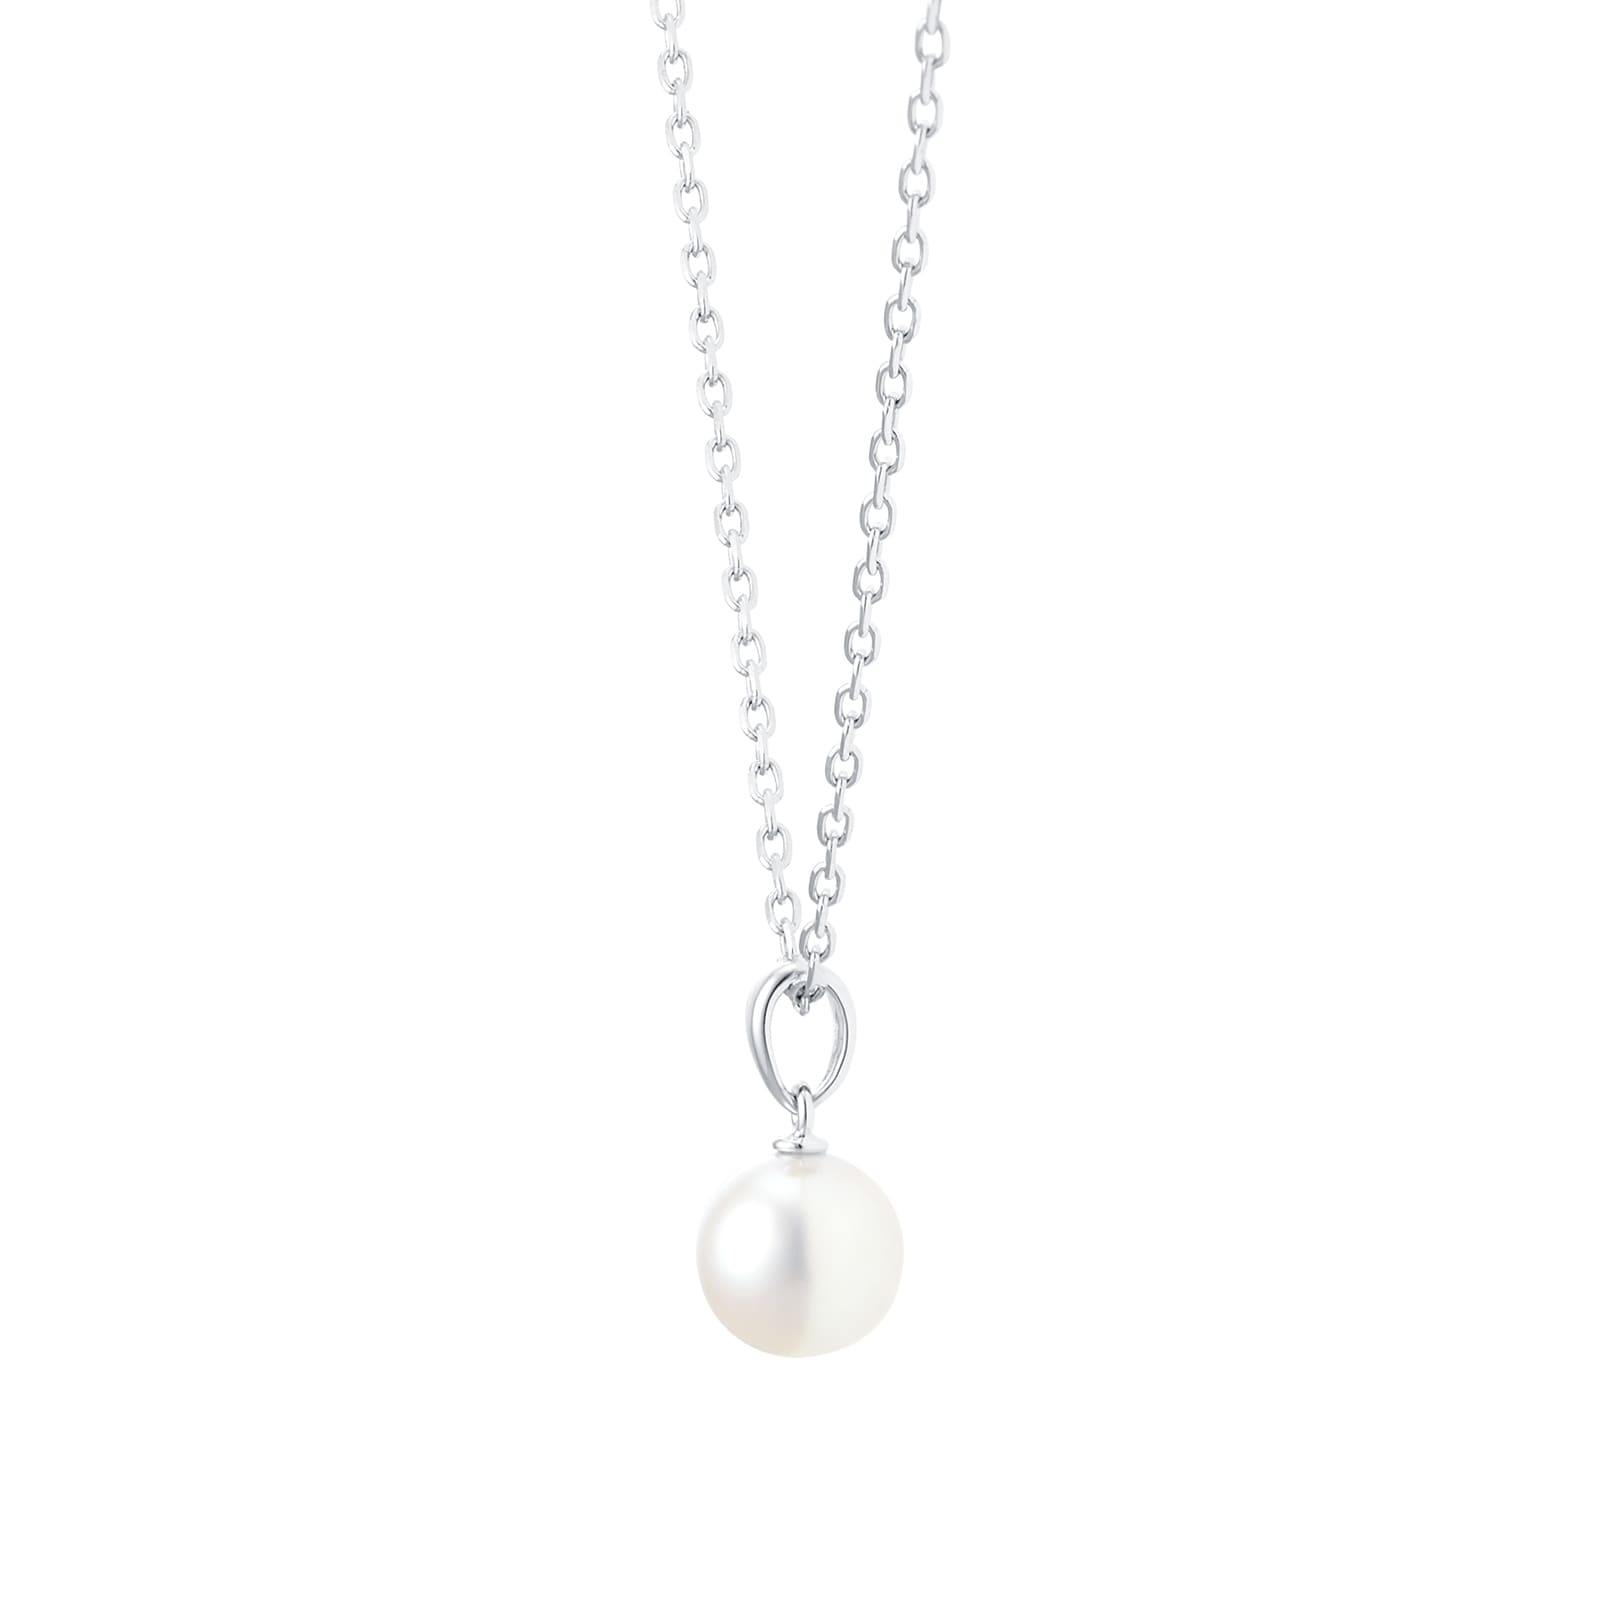 Mikimoto Classic Collection 7mm Grade AA Akoya Pearl Pendant PPS 703 W ...